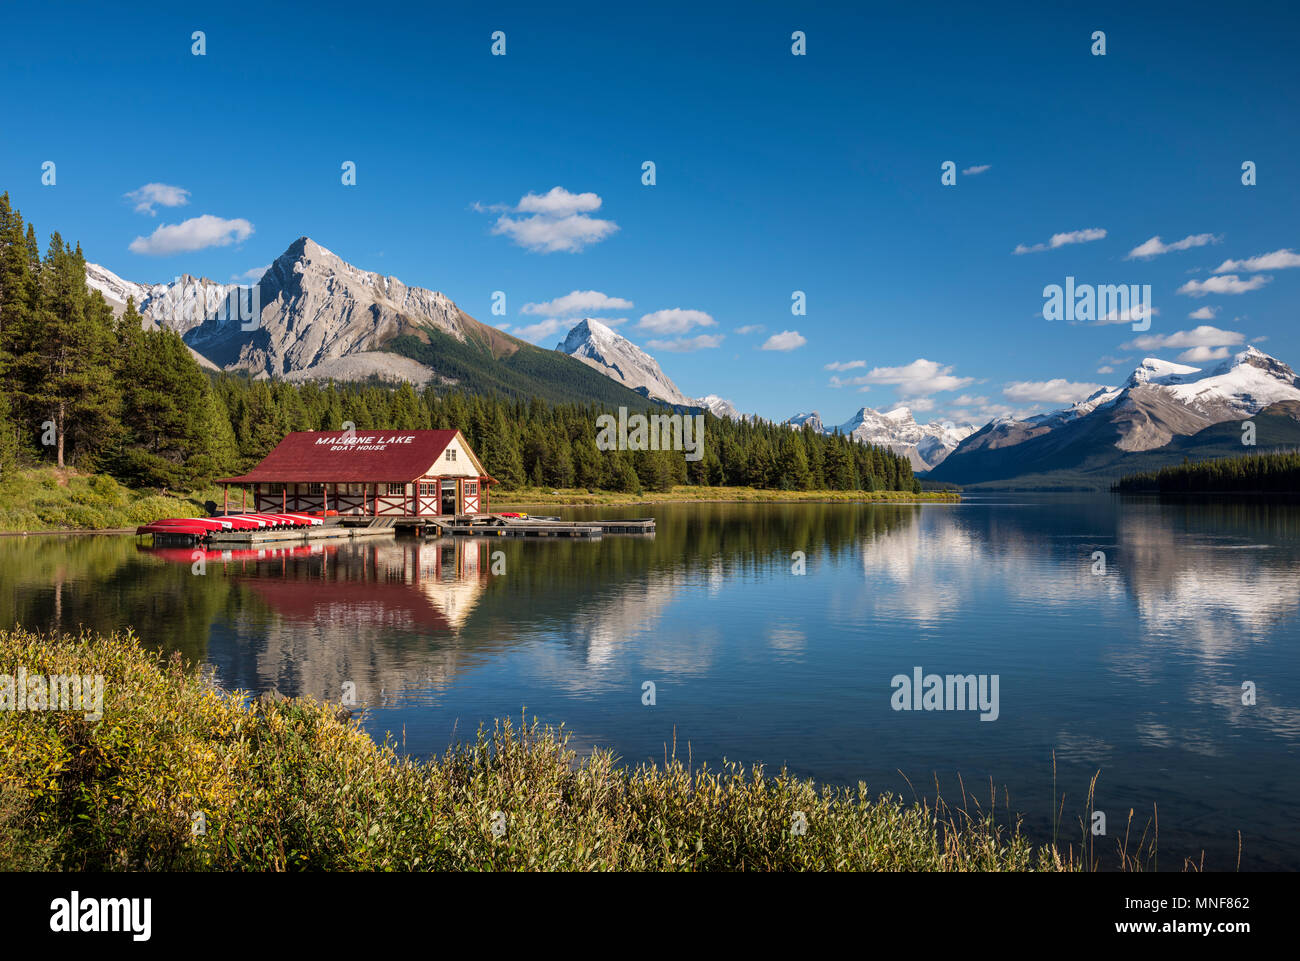 Boathouse with canoes on the shores of Maligne Lake, Jasper National Park, Rocky Mountains, Alberta, Canada Stock Photo